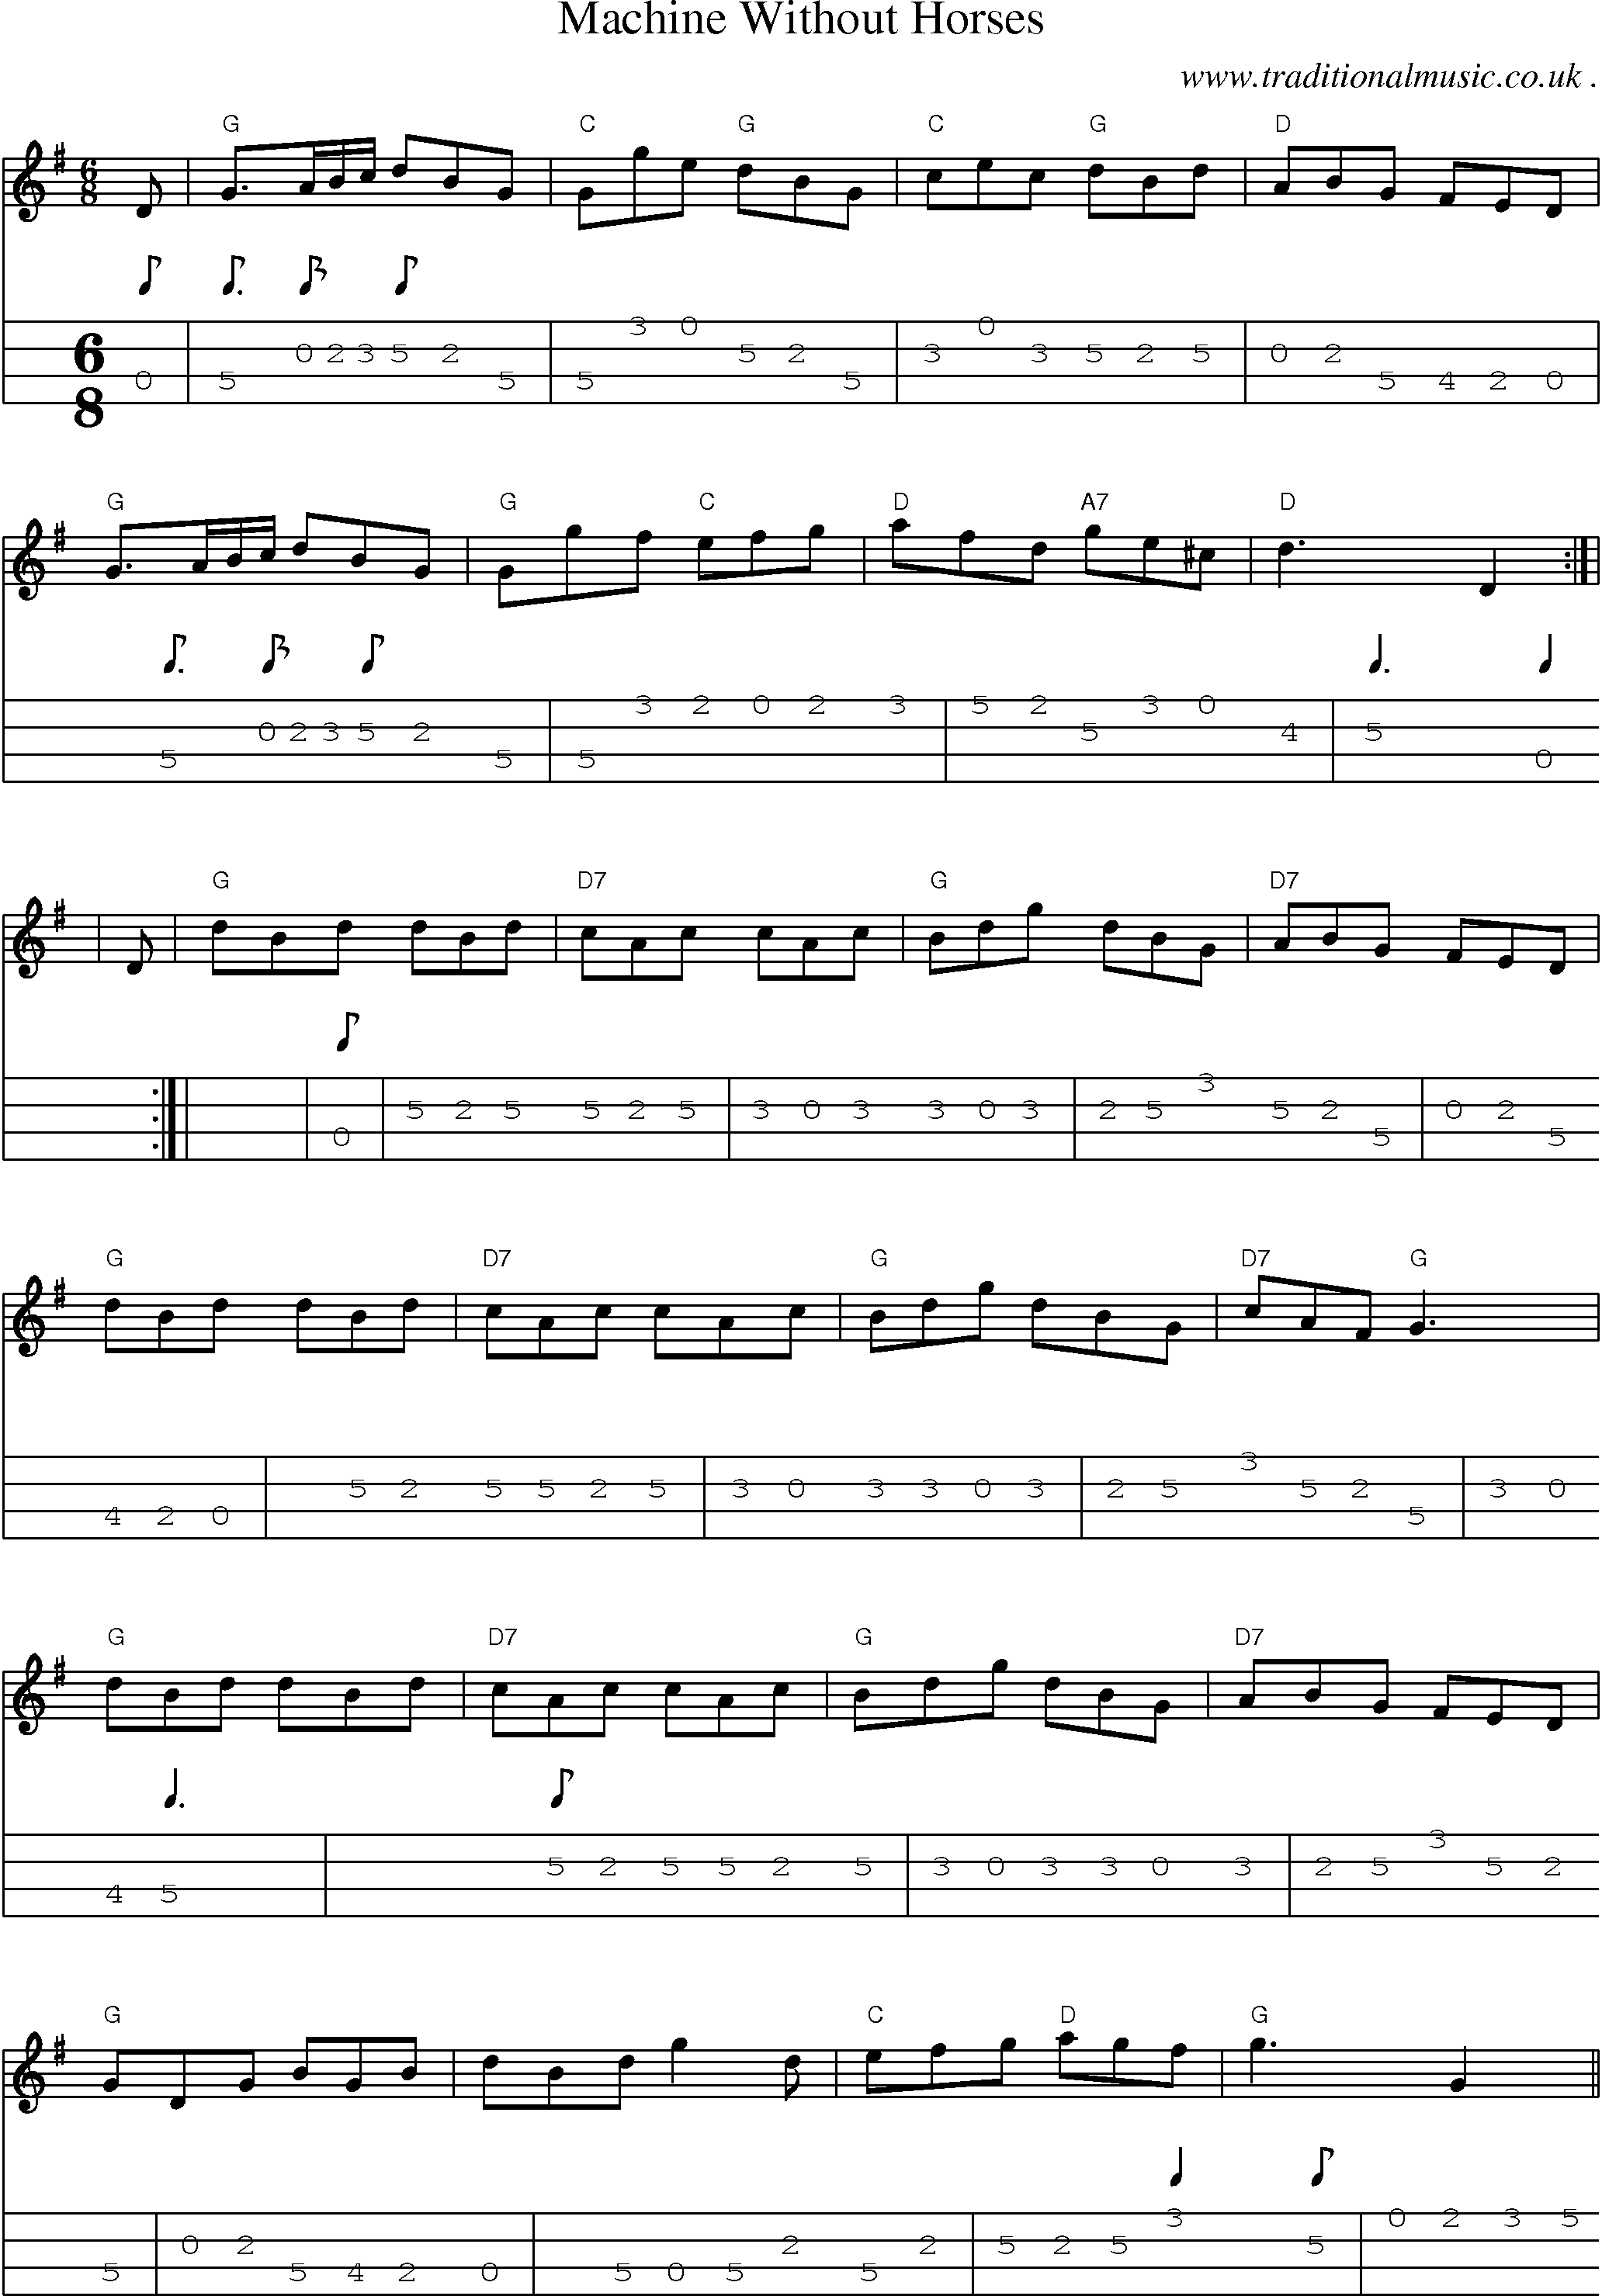 Sheet-music  score, Chords and Mandolin Tabs for Machine Without Horses